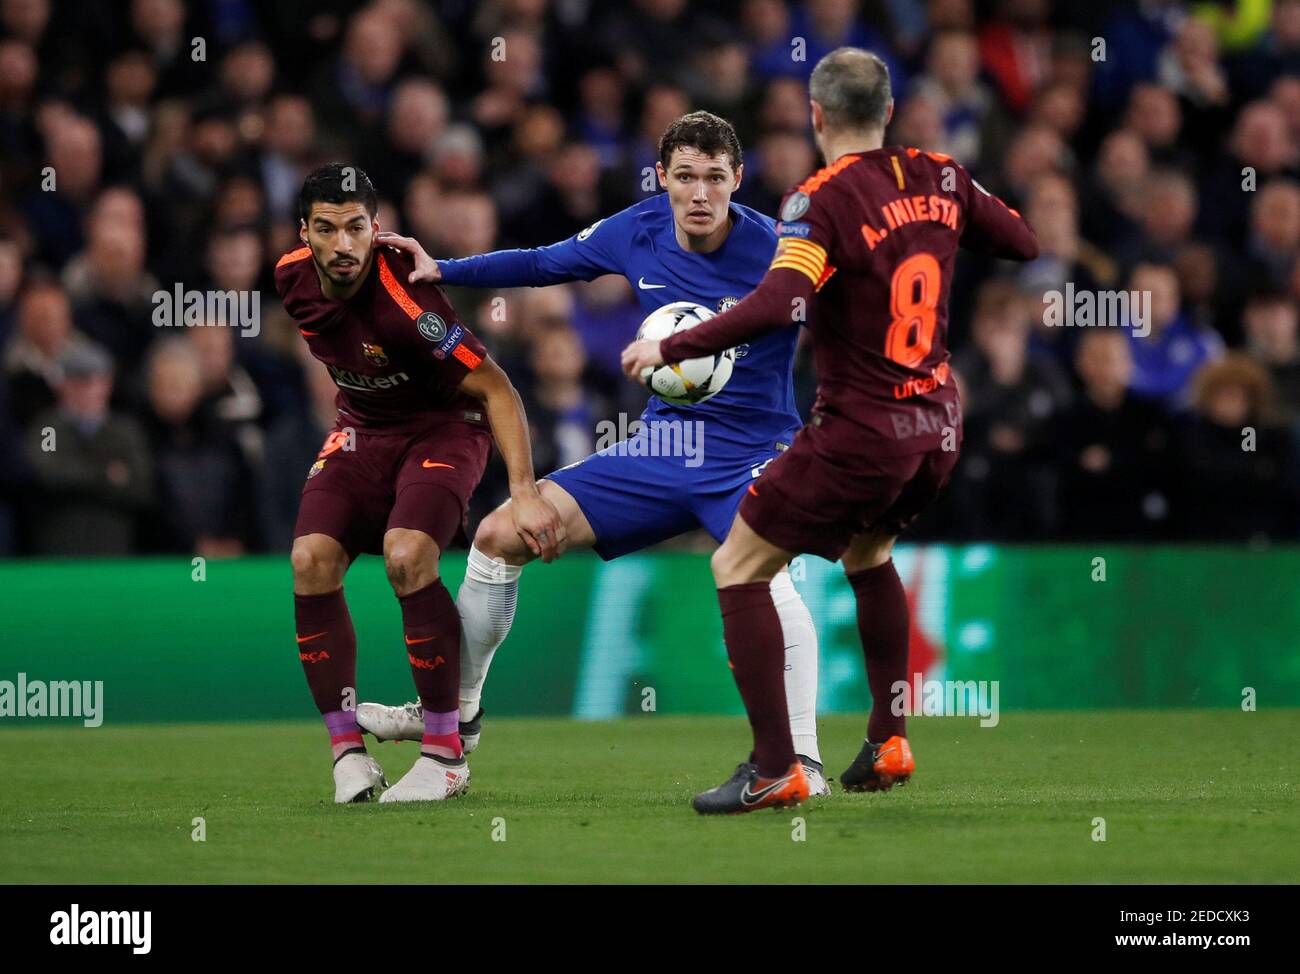 Soccer Football - Champions League Round of 16 First Leg - Chelsea vs FC Barcelona - Stamford Bridge, London, Britain - February 20, 2018   Chelsea's Andreas Christensen in action with Barcelona’s Luis Suarez and Andres Iniesta    REUTERS/Eddie Keogh Stock Photo